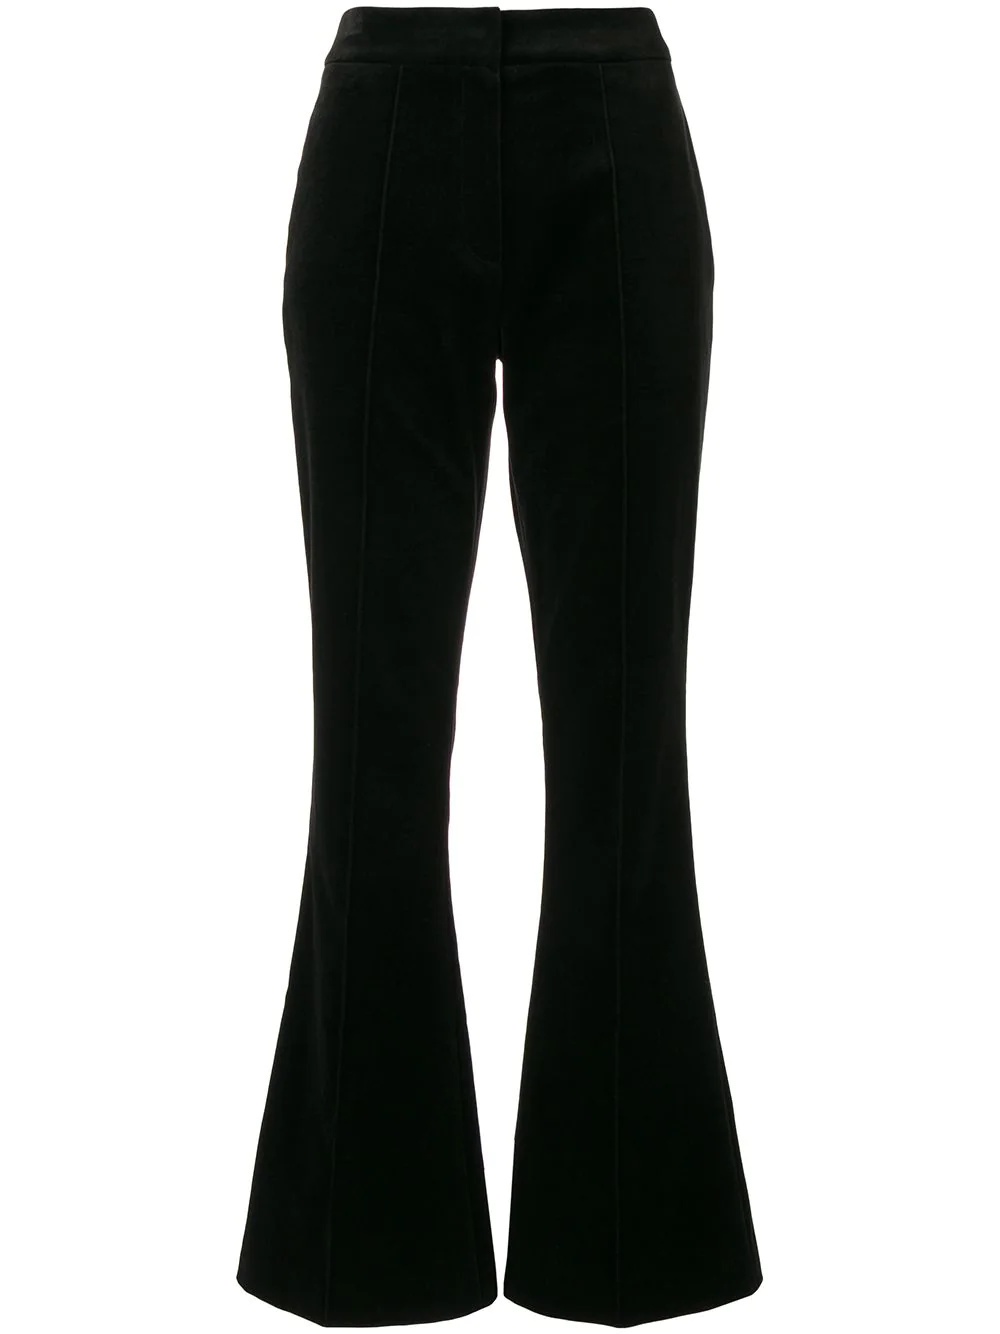 flared style trousers - 1